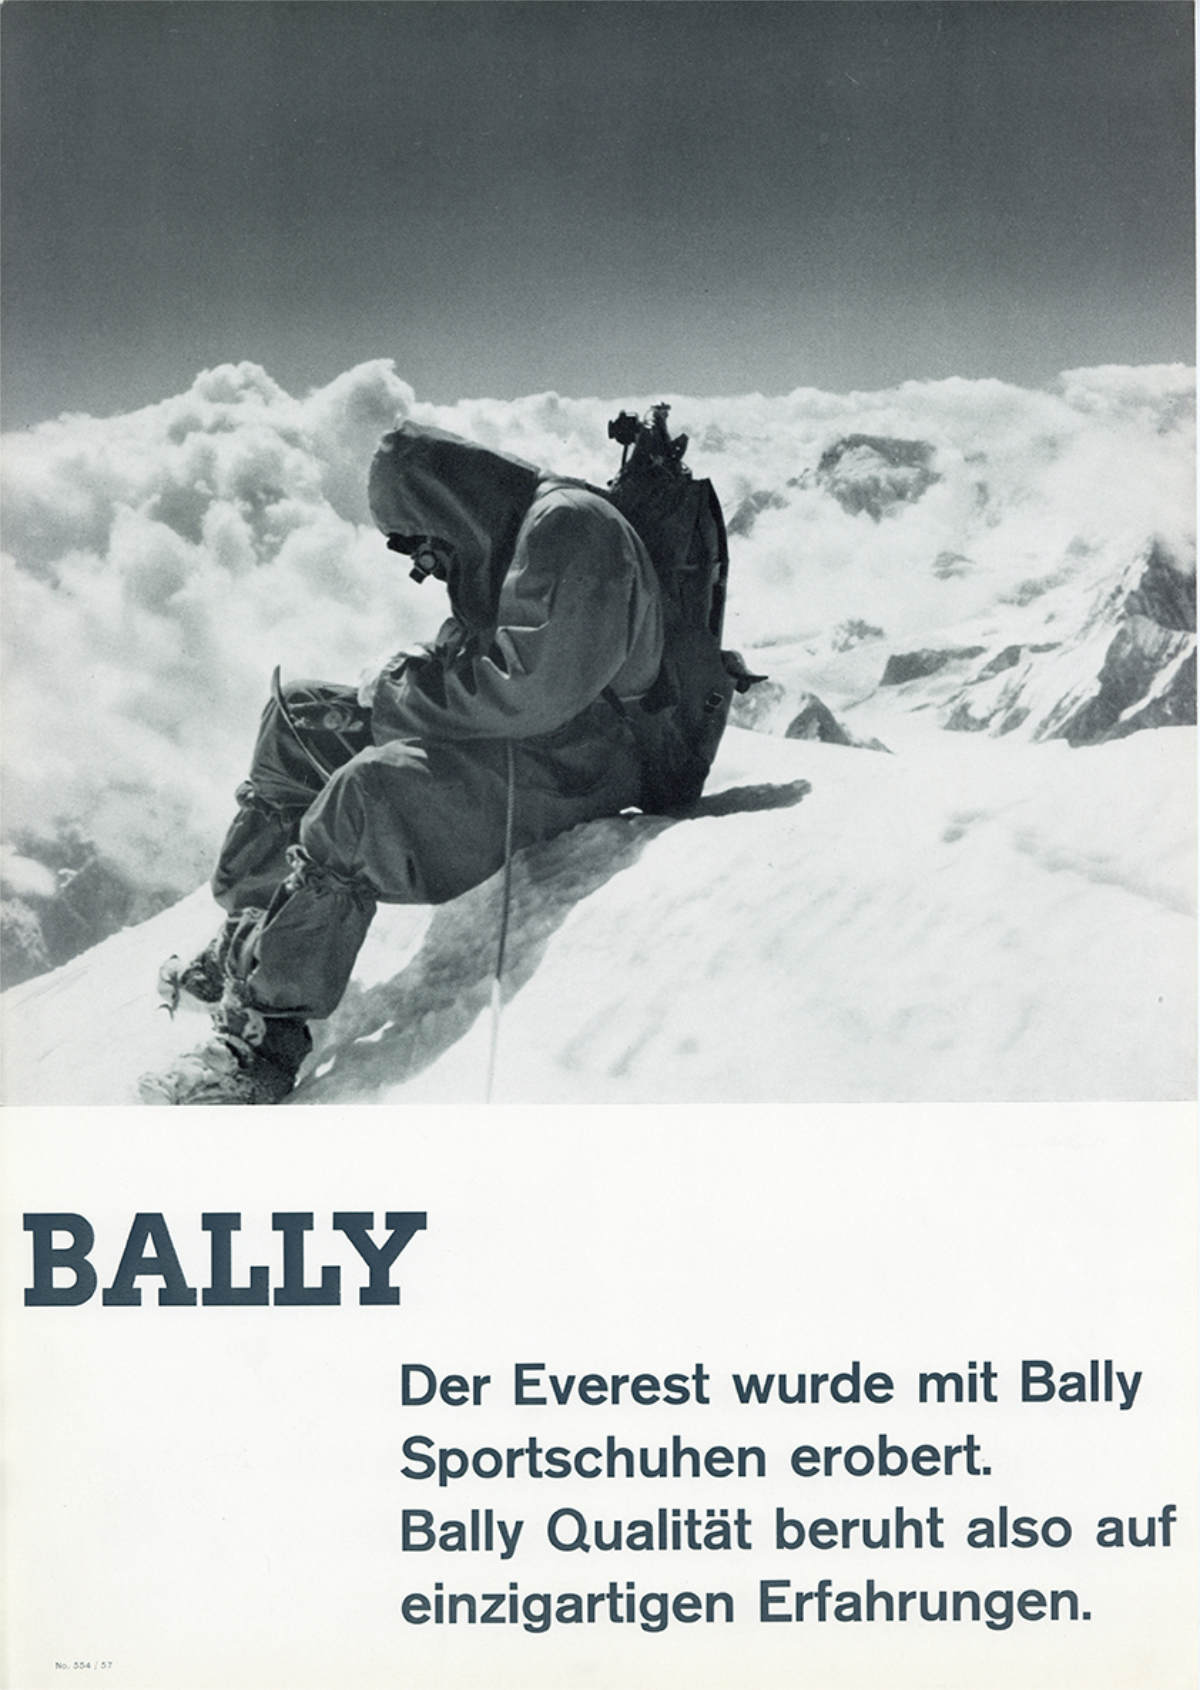 Bally Peak Outlook Foundation Commits To Cleaning Mount Everest Through 2030